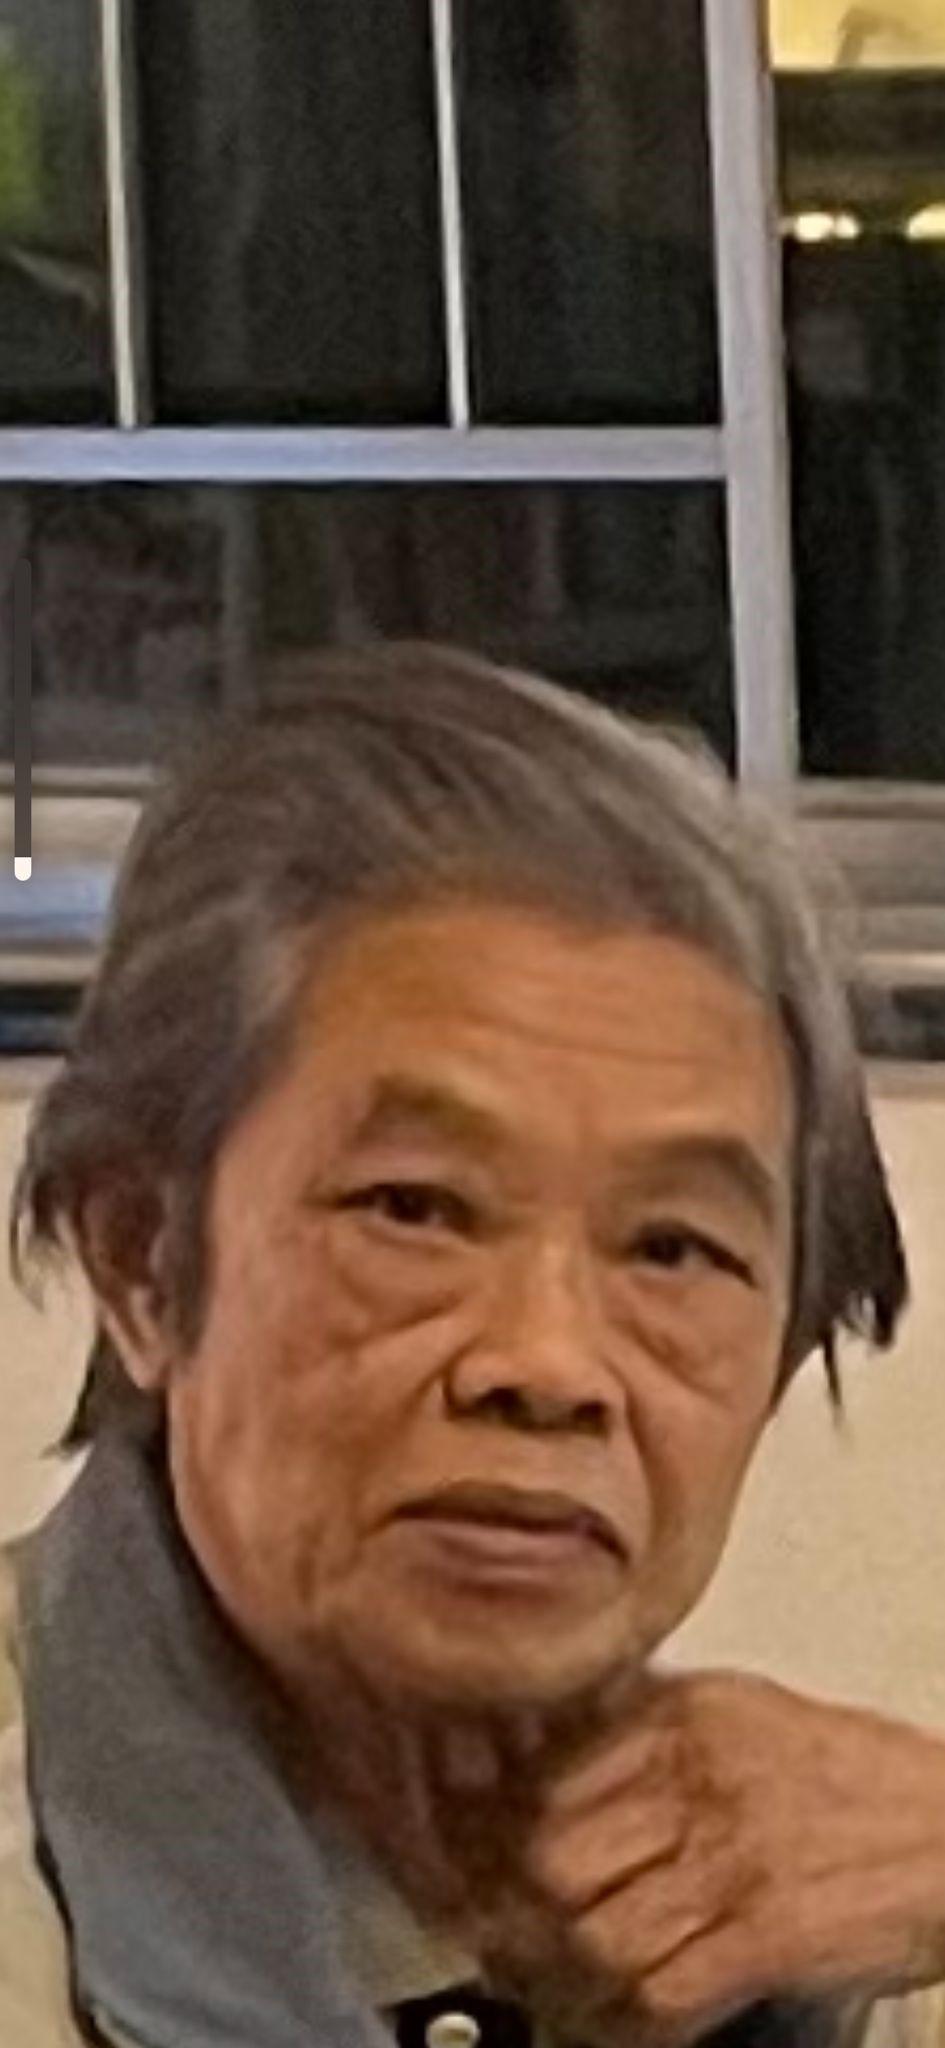 Wong Si-wo, aged 79, is about 1.55 metres tall and of thin build. He has a pointed face with yellow complexion and short grey and white hair.